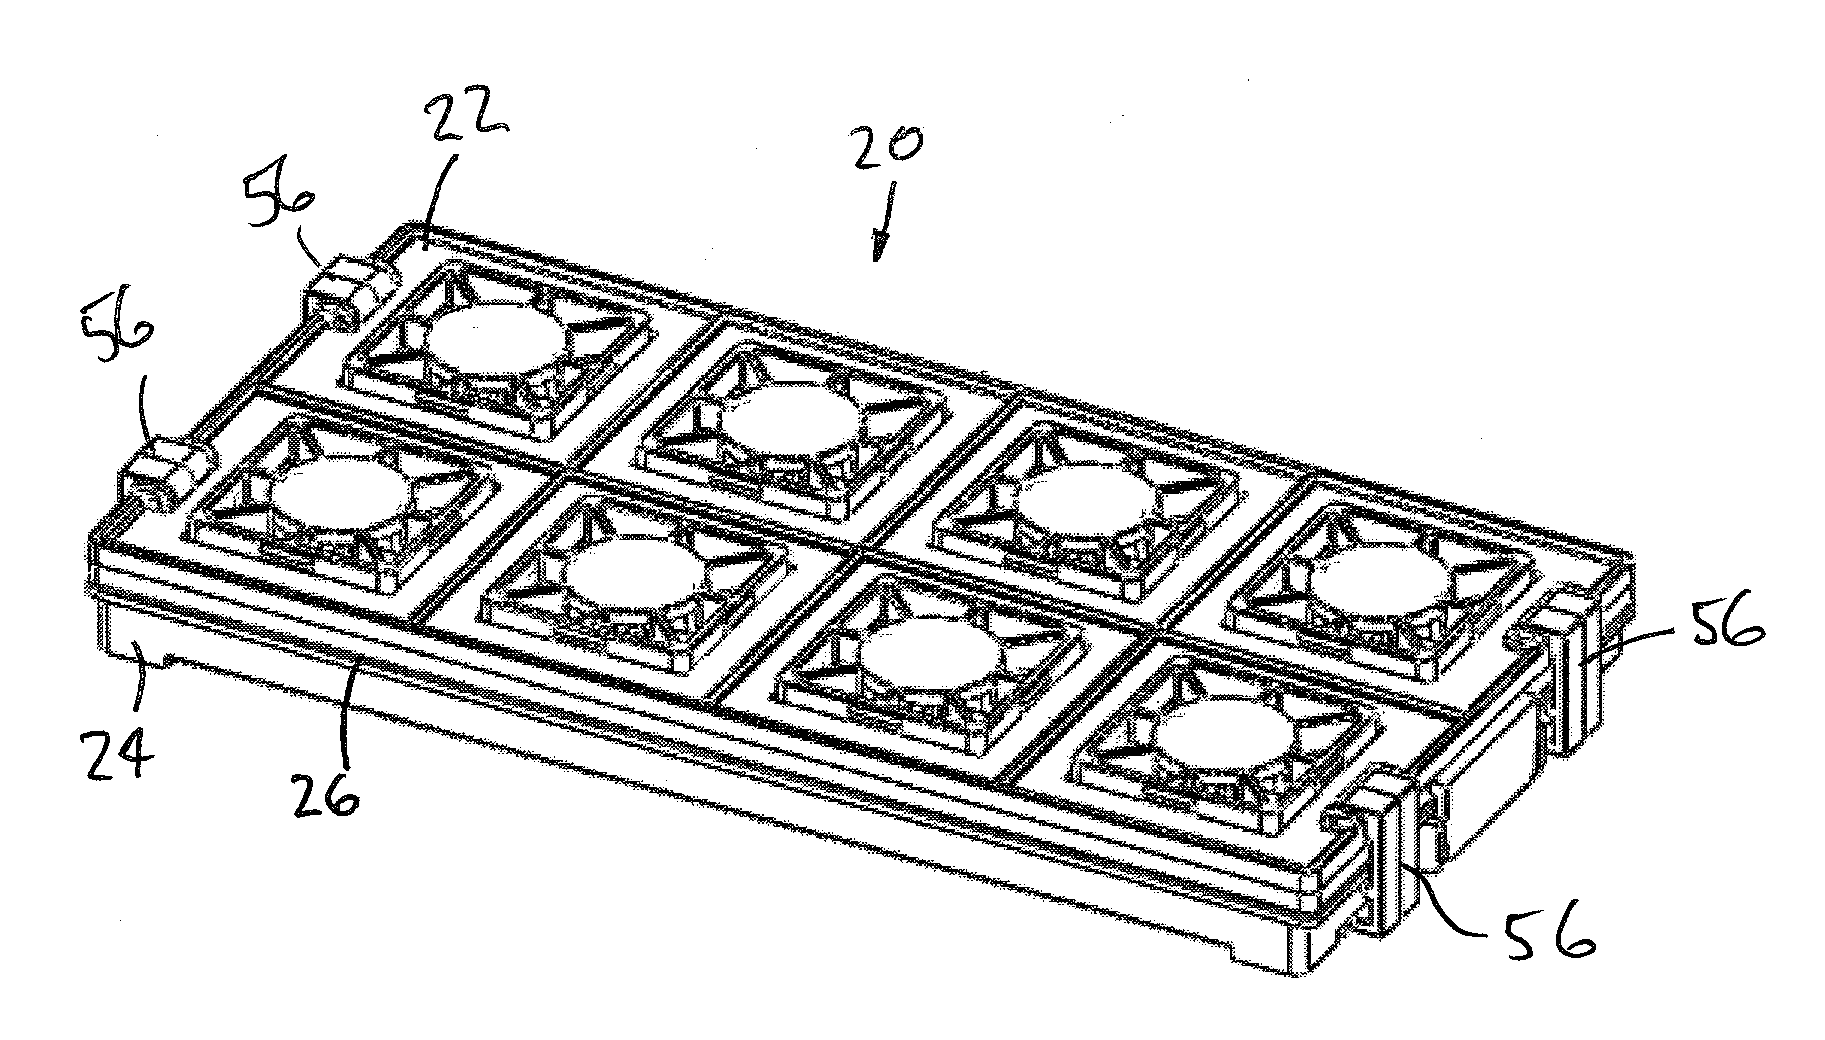 Tissue retrieval, storage, and explant culture device for the derivation of stem cells